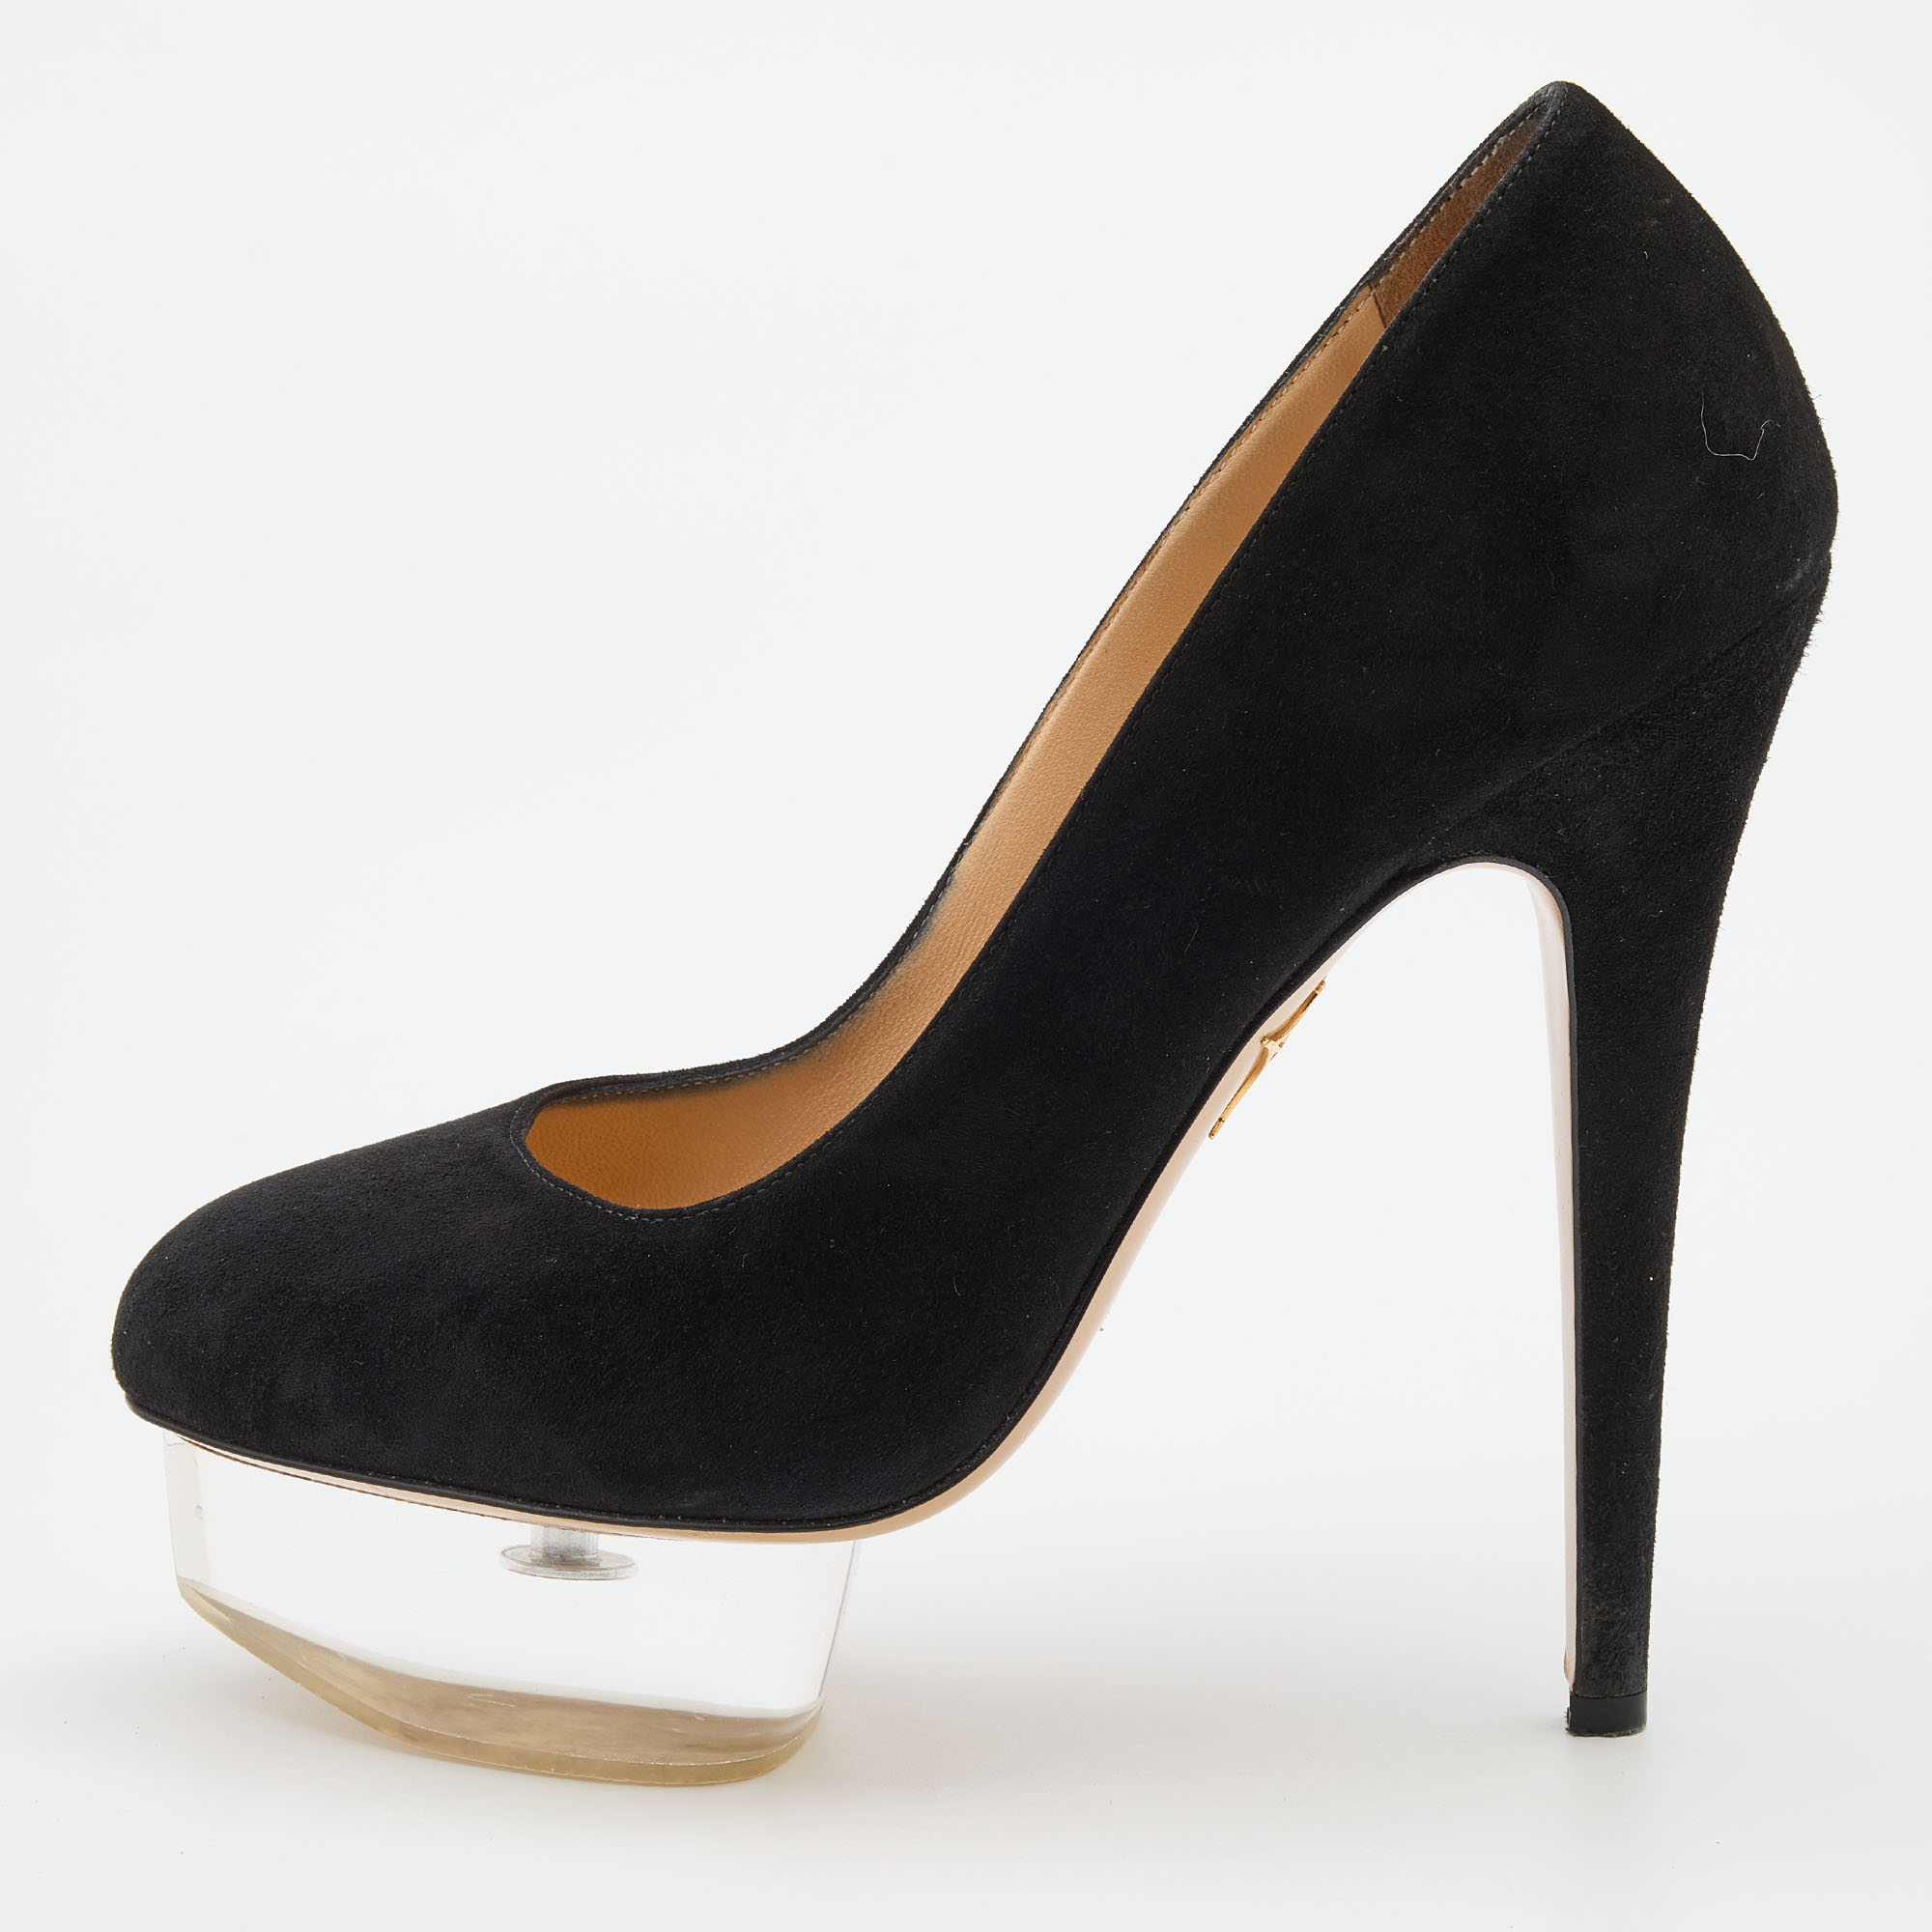 These pumps are a great choice if you're looking to add a pair thats both classy and versatile. The pair has been made using only the best kind of materials to ensure lasting wear.